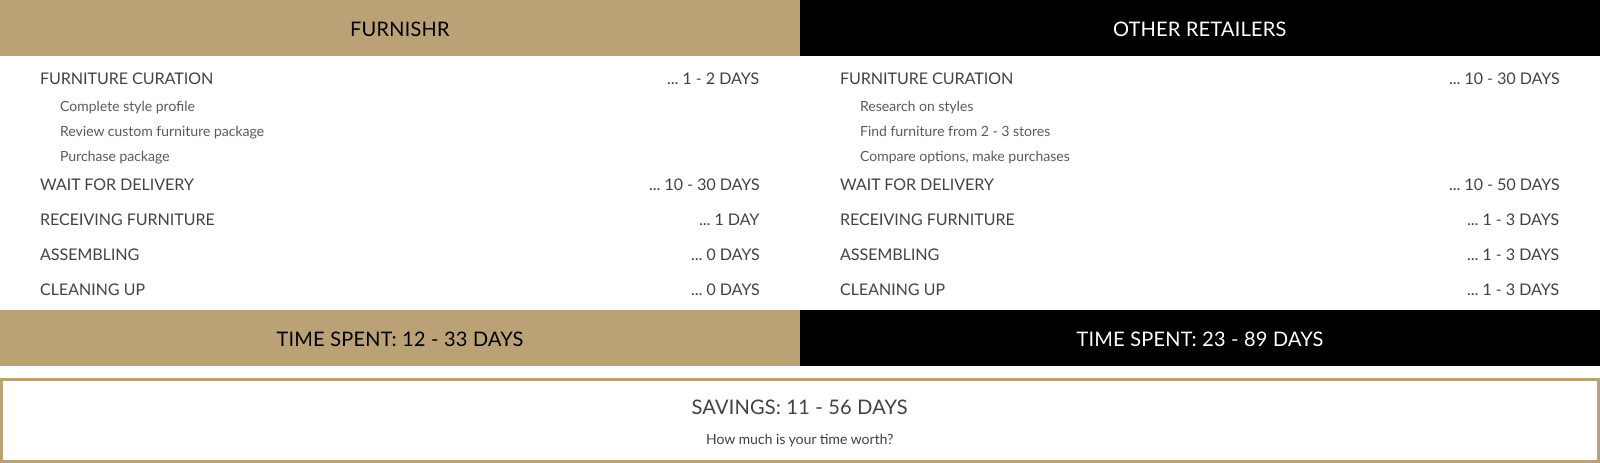 comparing the delivery times between furnishr and other retailers